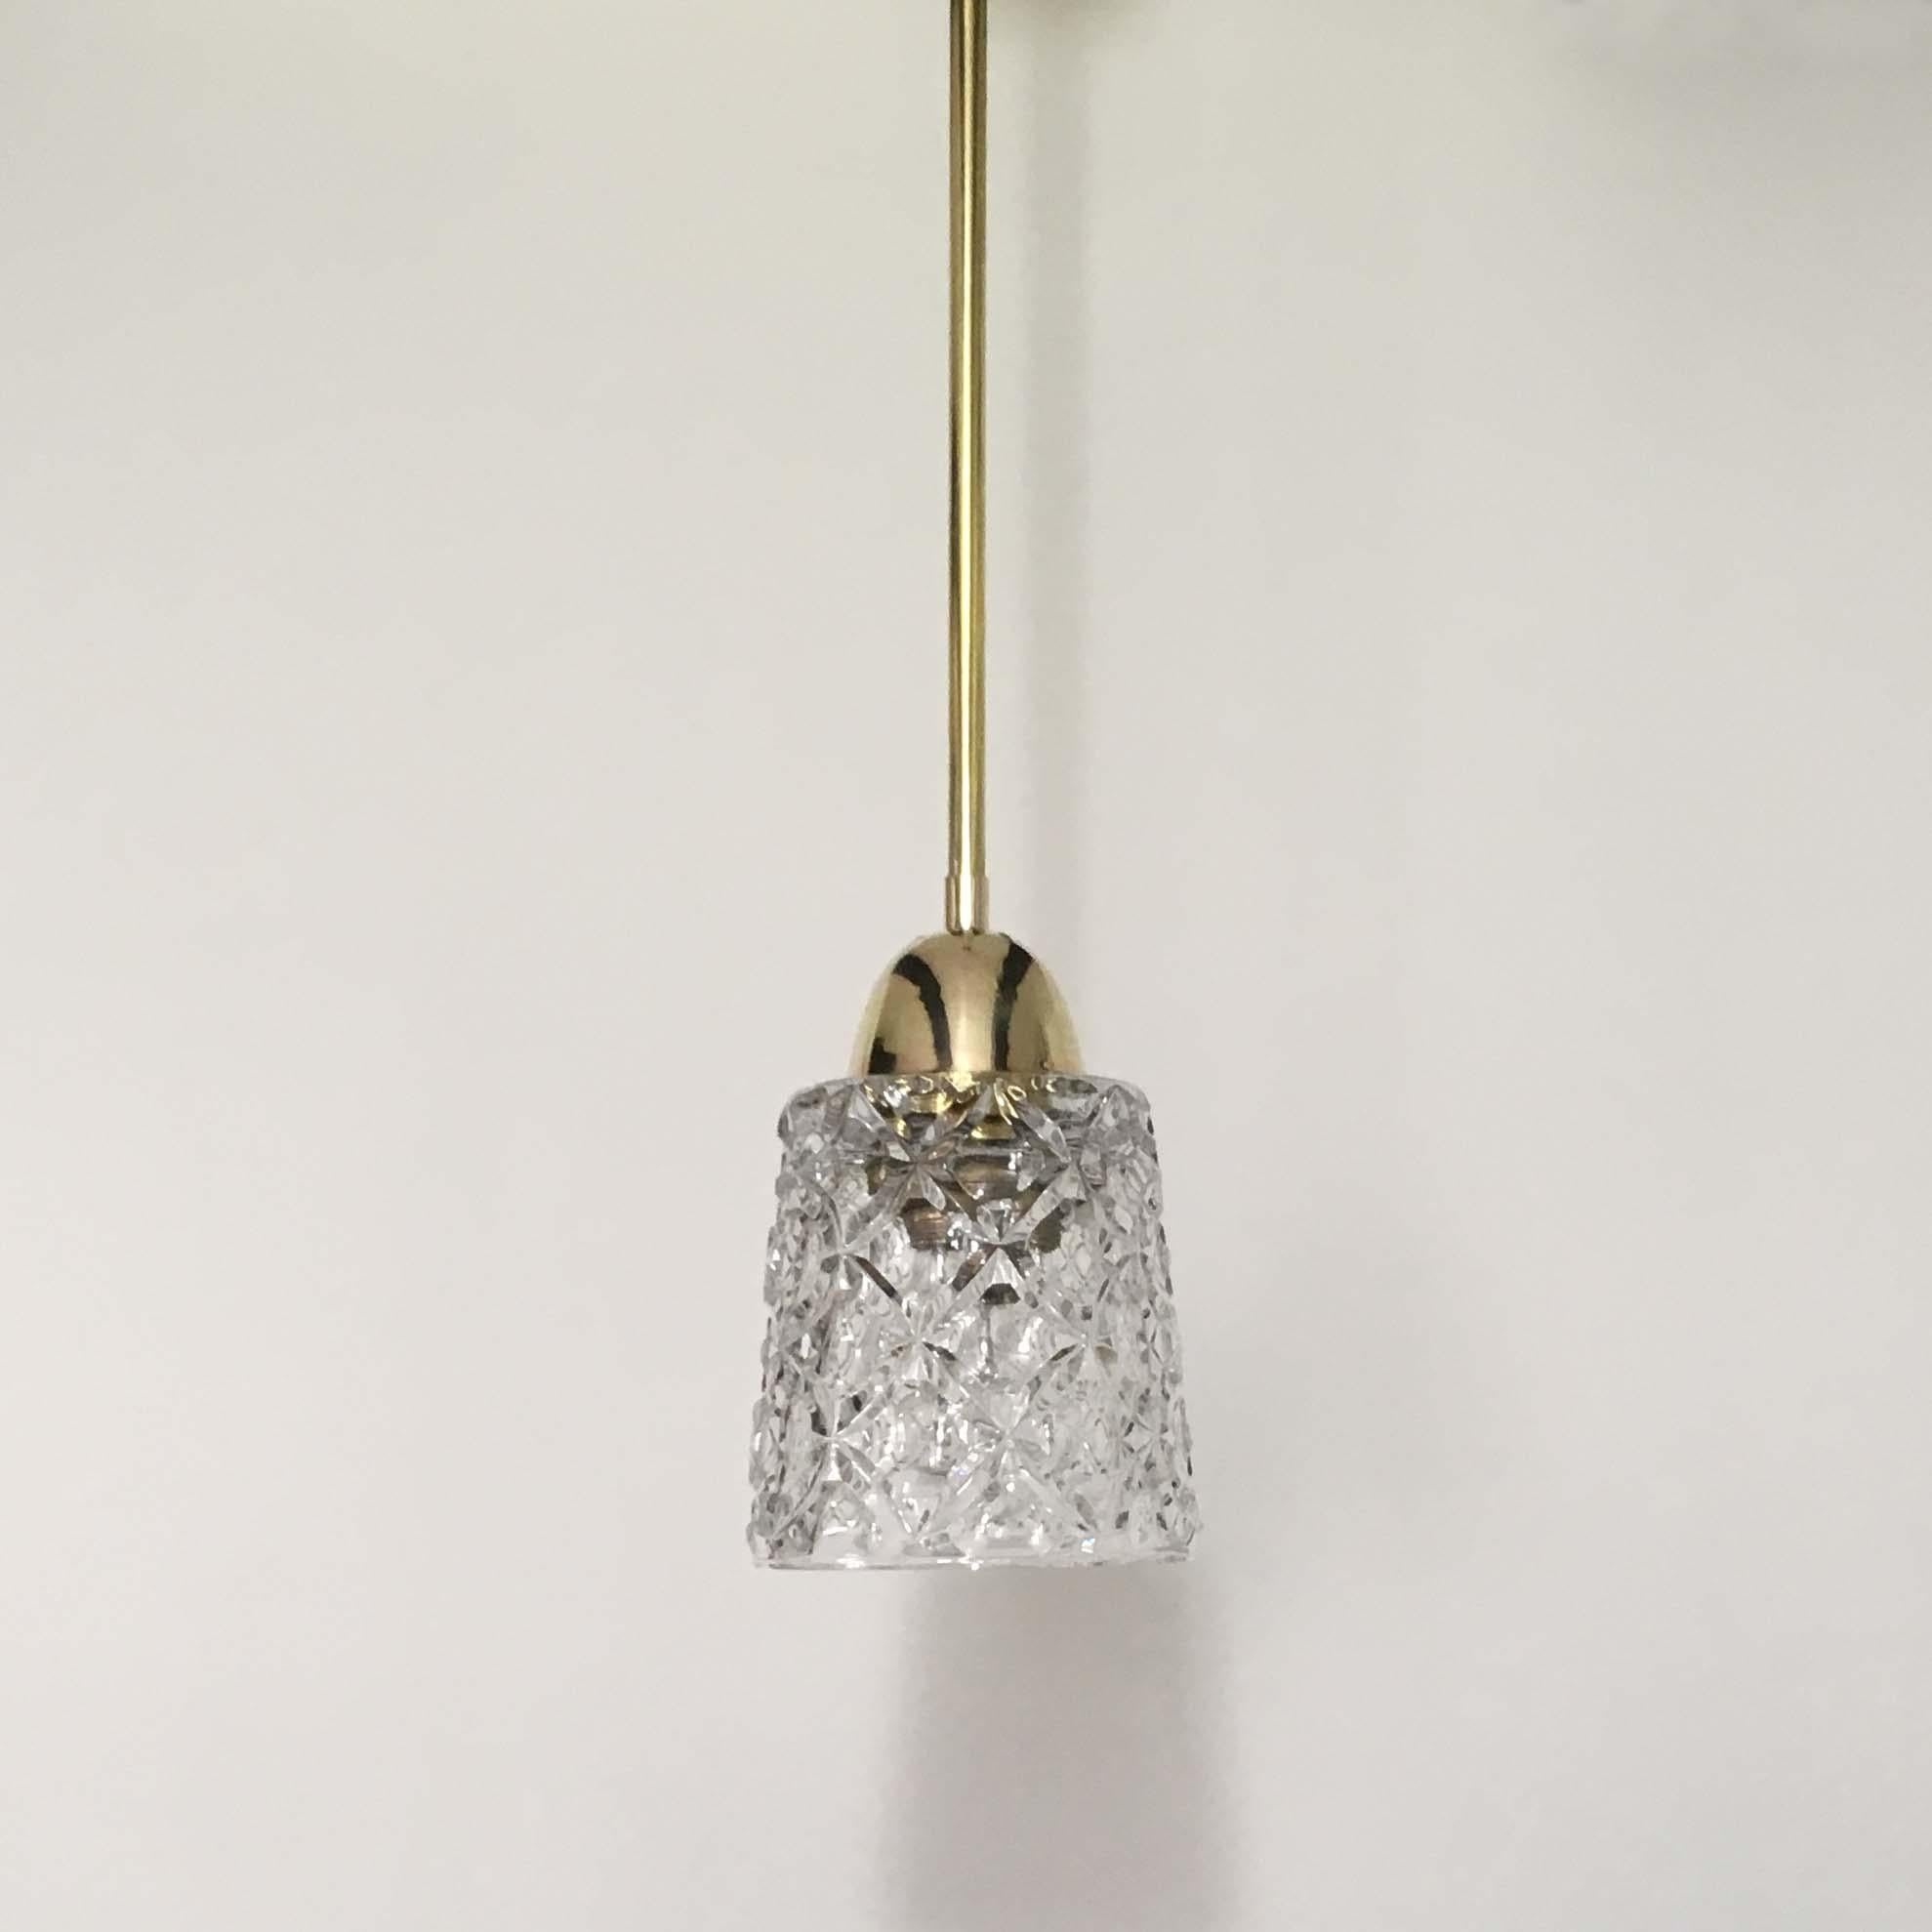 Mid-Century Modern Italian Brass and Crystal Cut Glass Pendant, 1950s For Sale 1